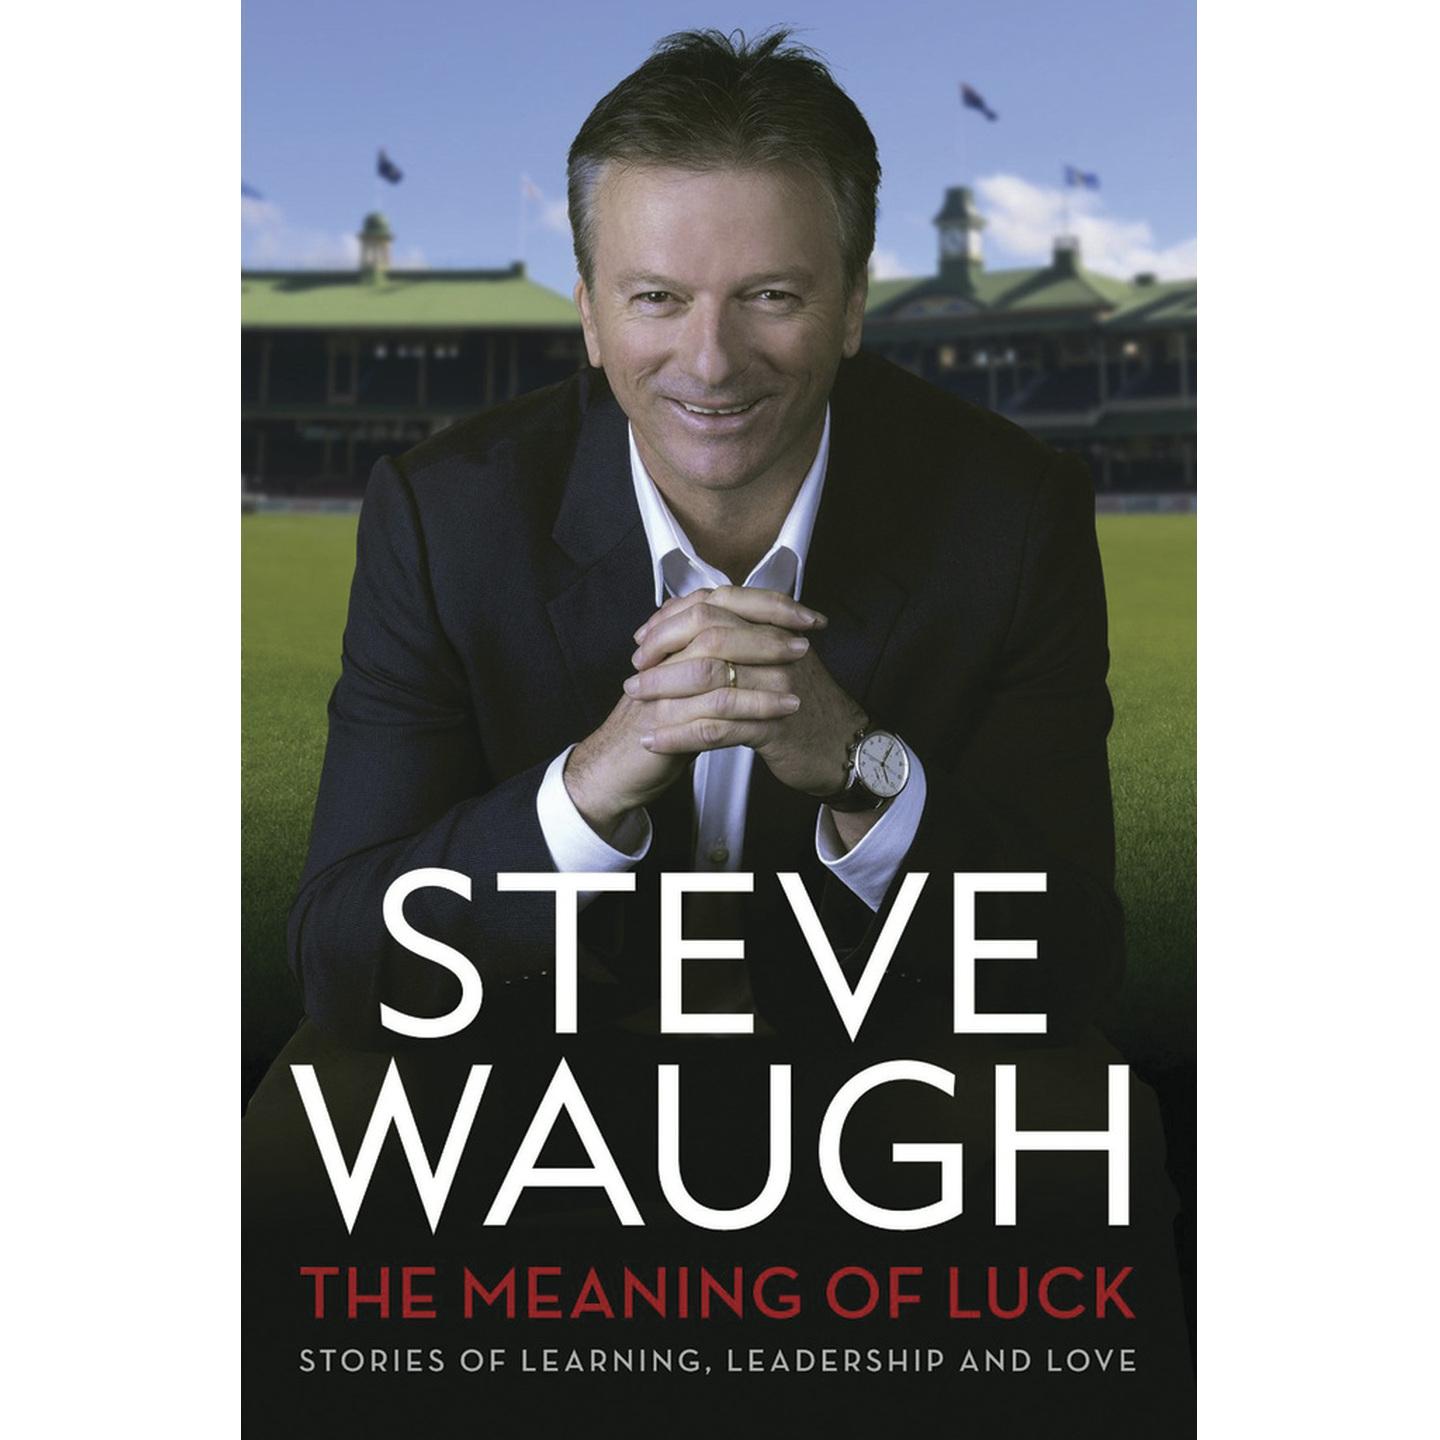 The Meaning of Luck Book by Steve Waugh